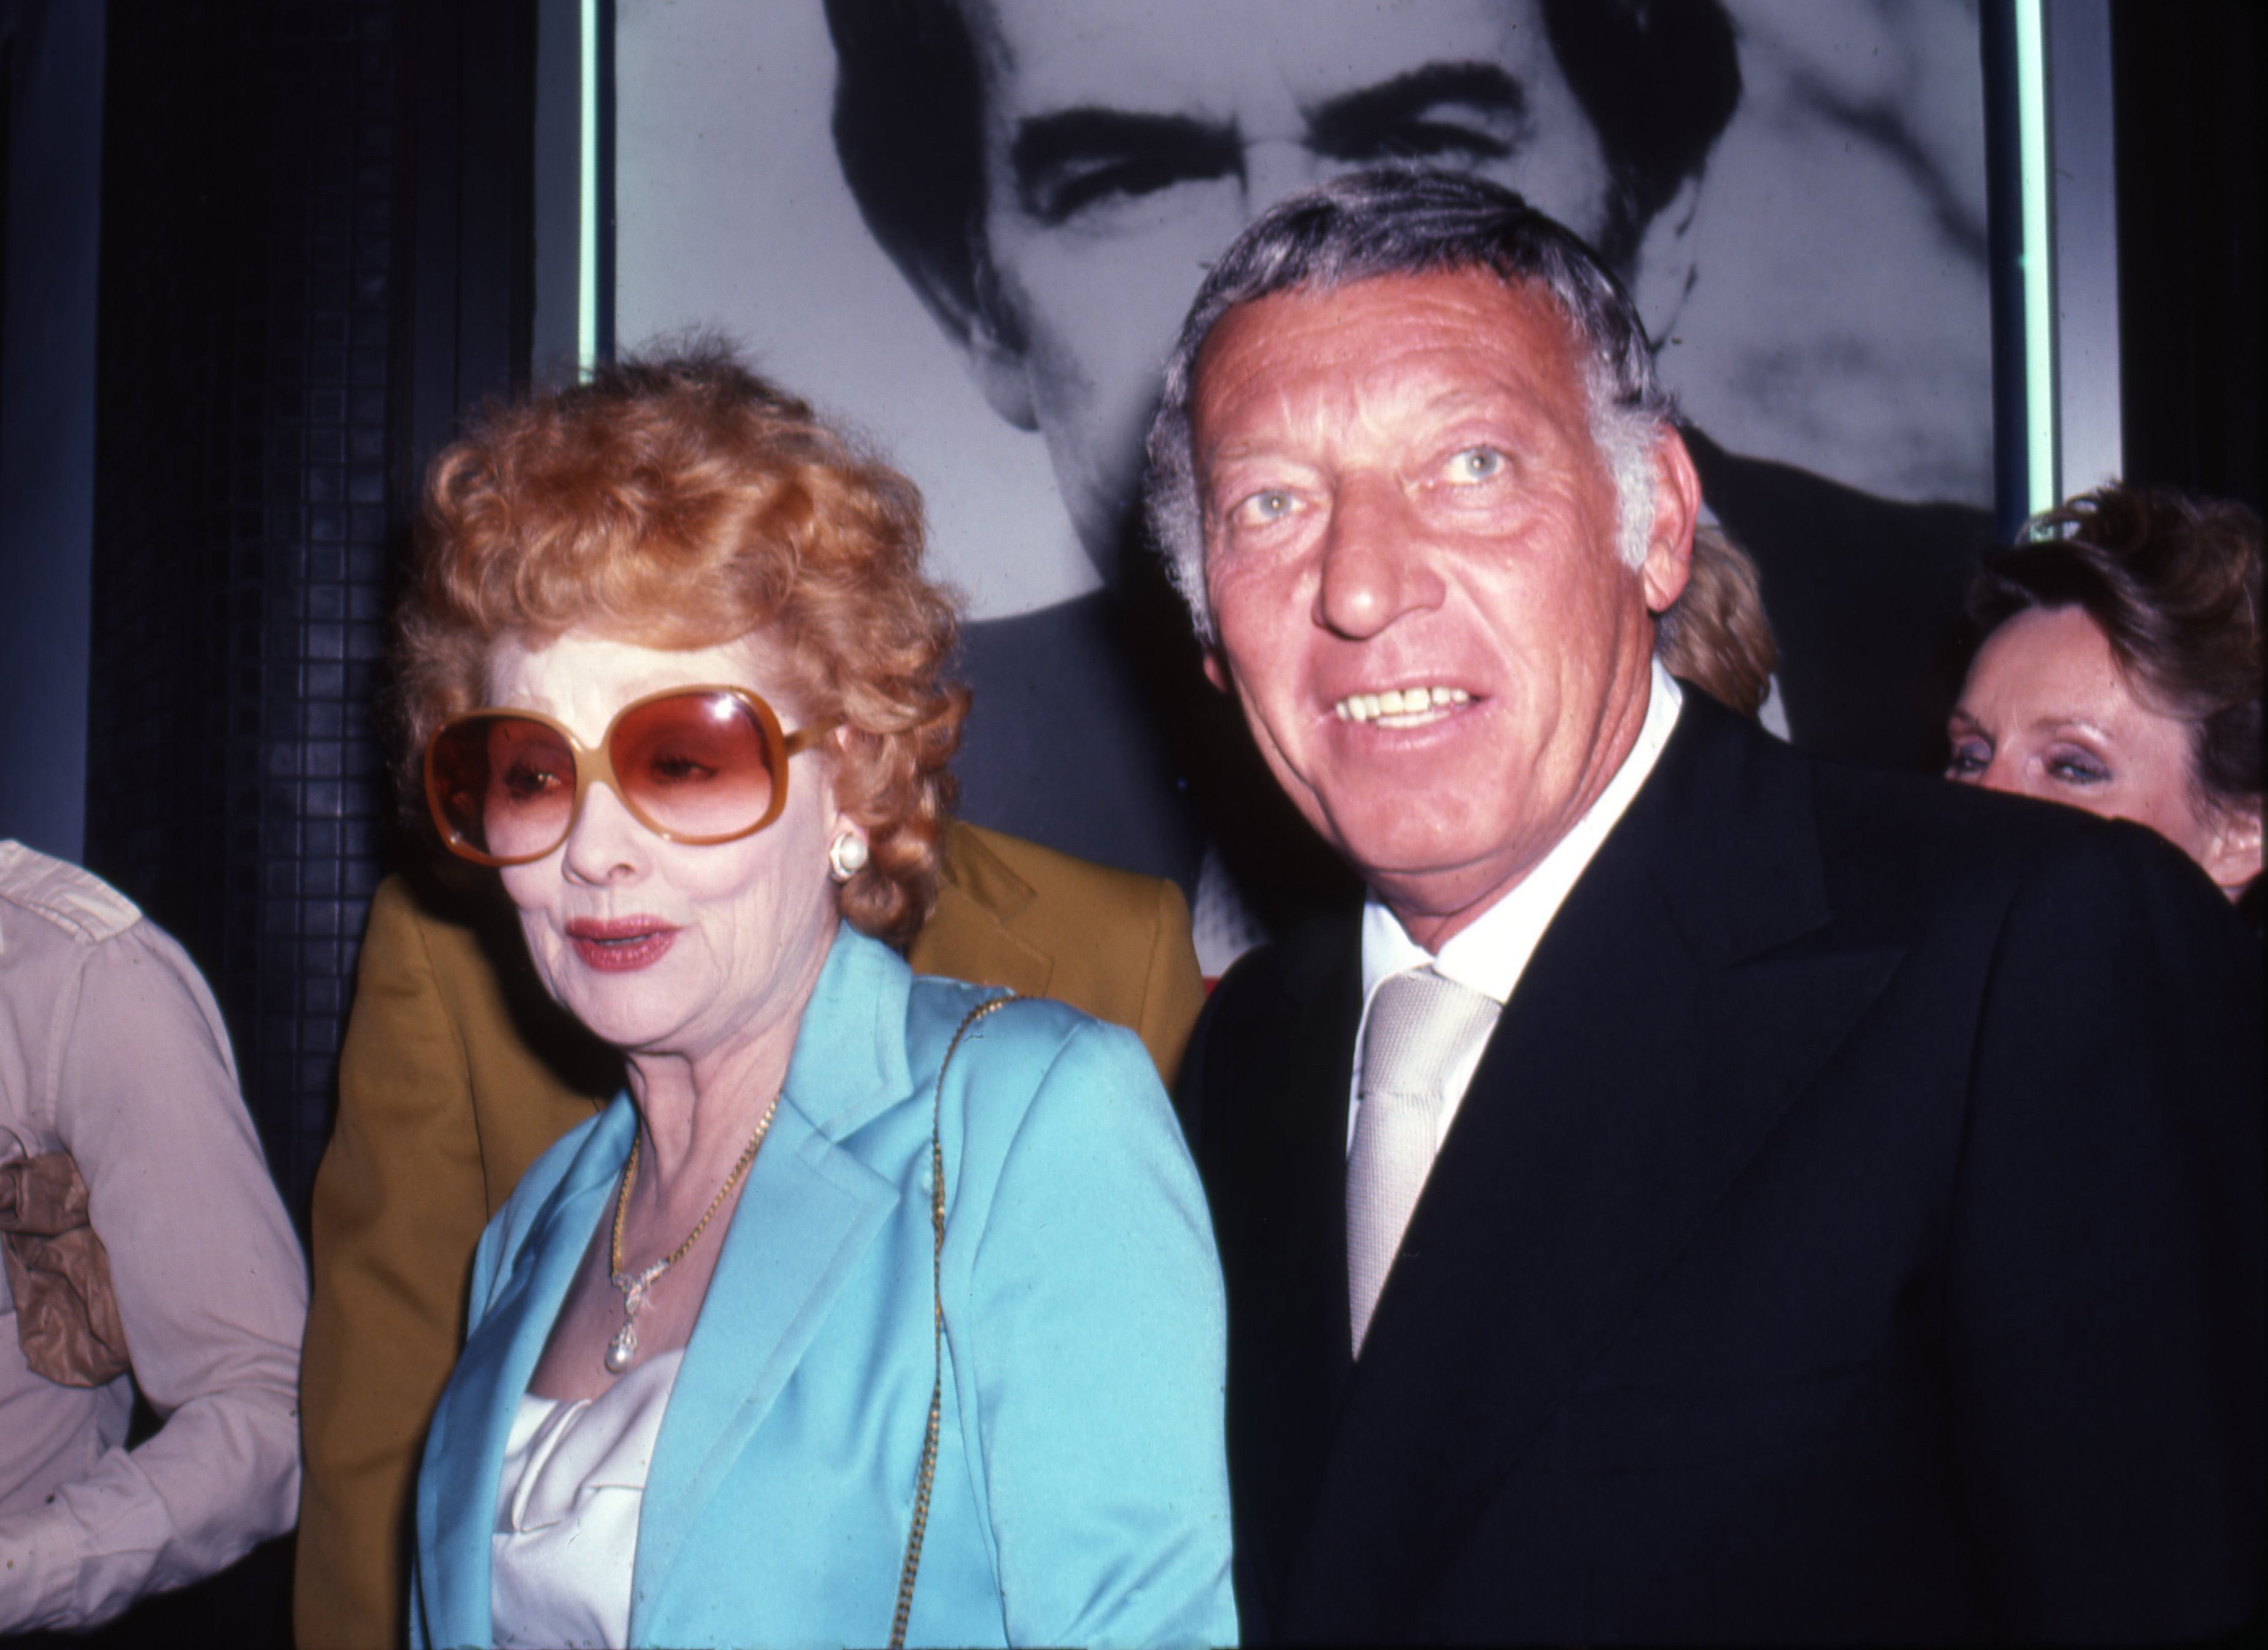 Lucille Ball and her husband Gary Morton in August 1980 |Ron Eisenberg/Michael Ochs Archives/Getty Images